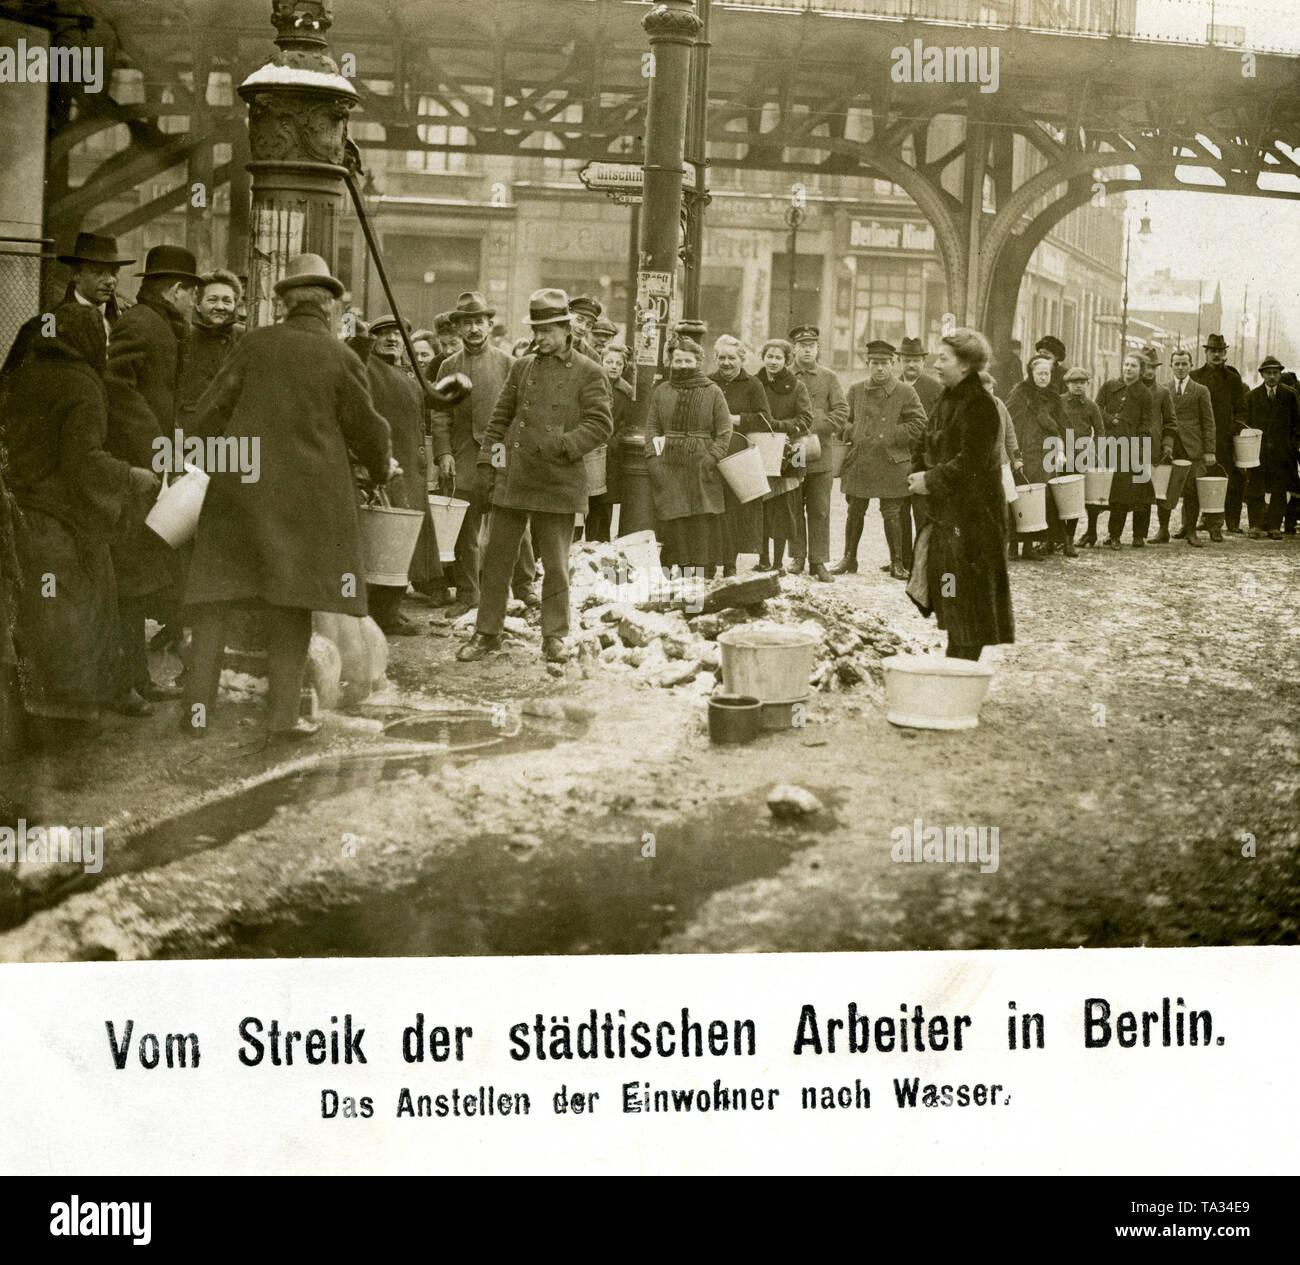 Since the strike of the urban workers also meant that the water supply failed, the inhabitants of Berlin were getting their water by means of the old water pumps of the city and many buckets and bowls. (undated photo) Stock Photo